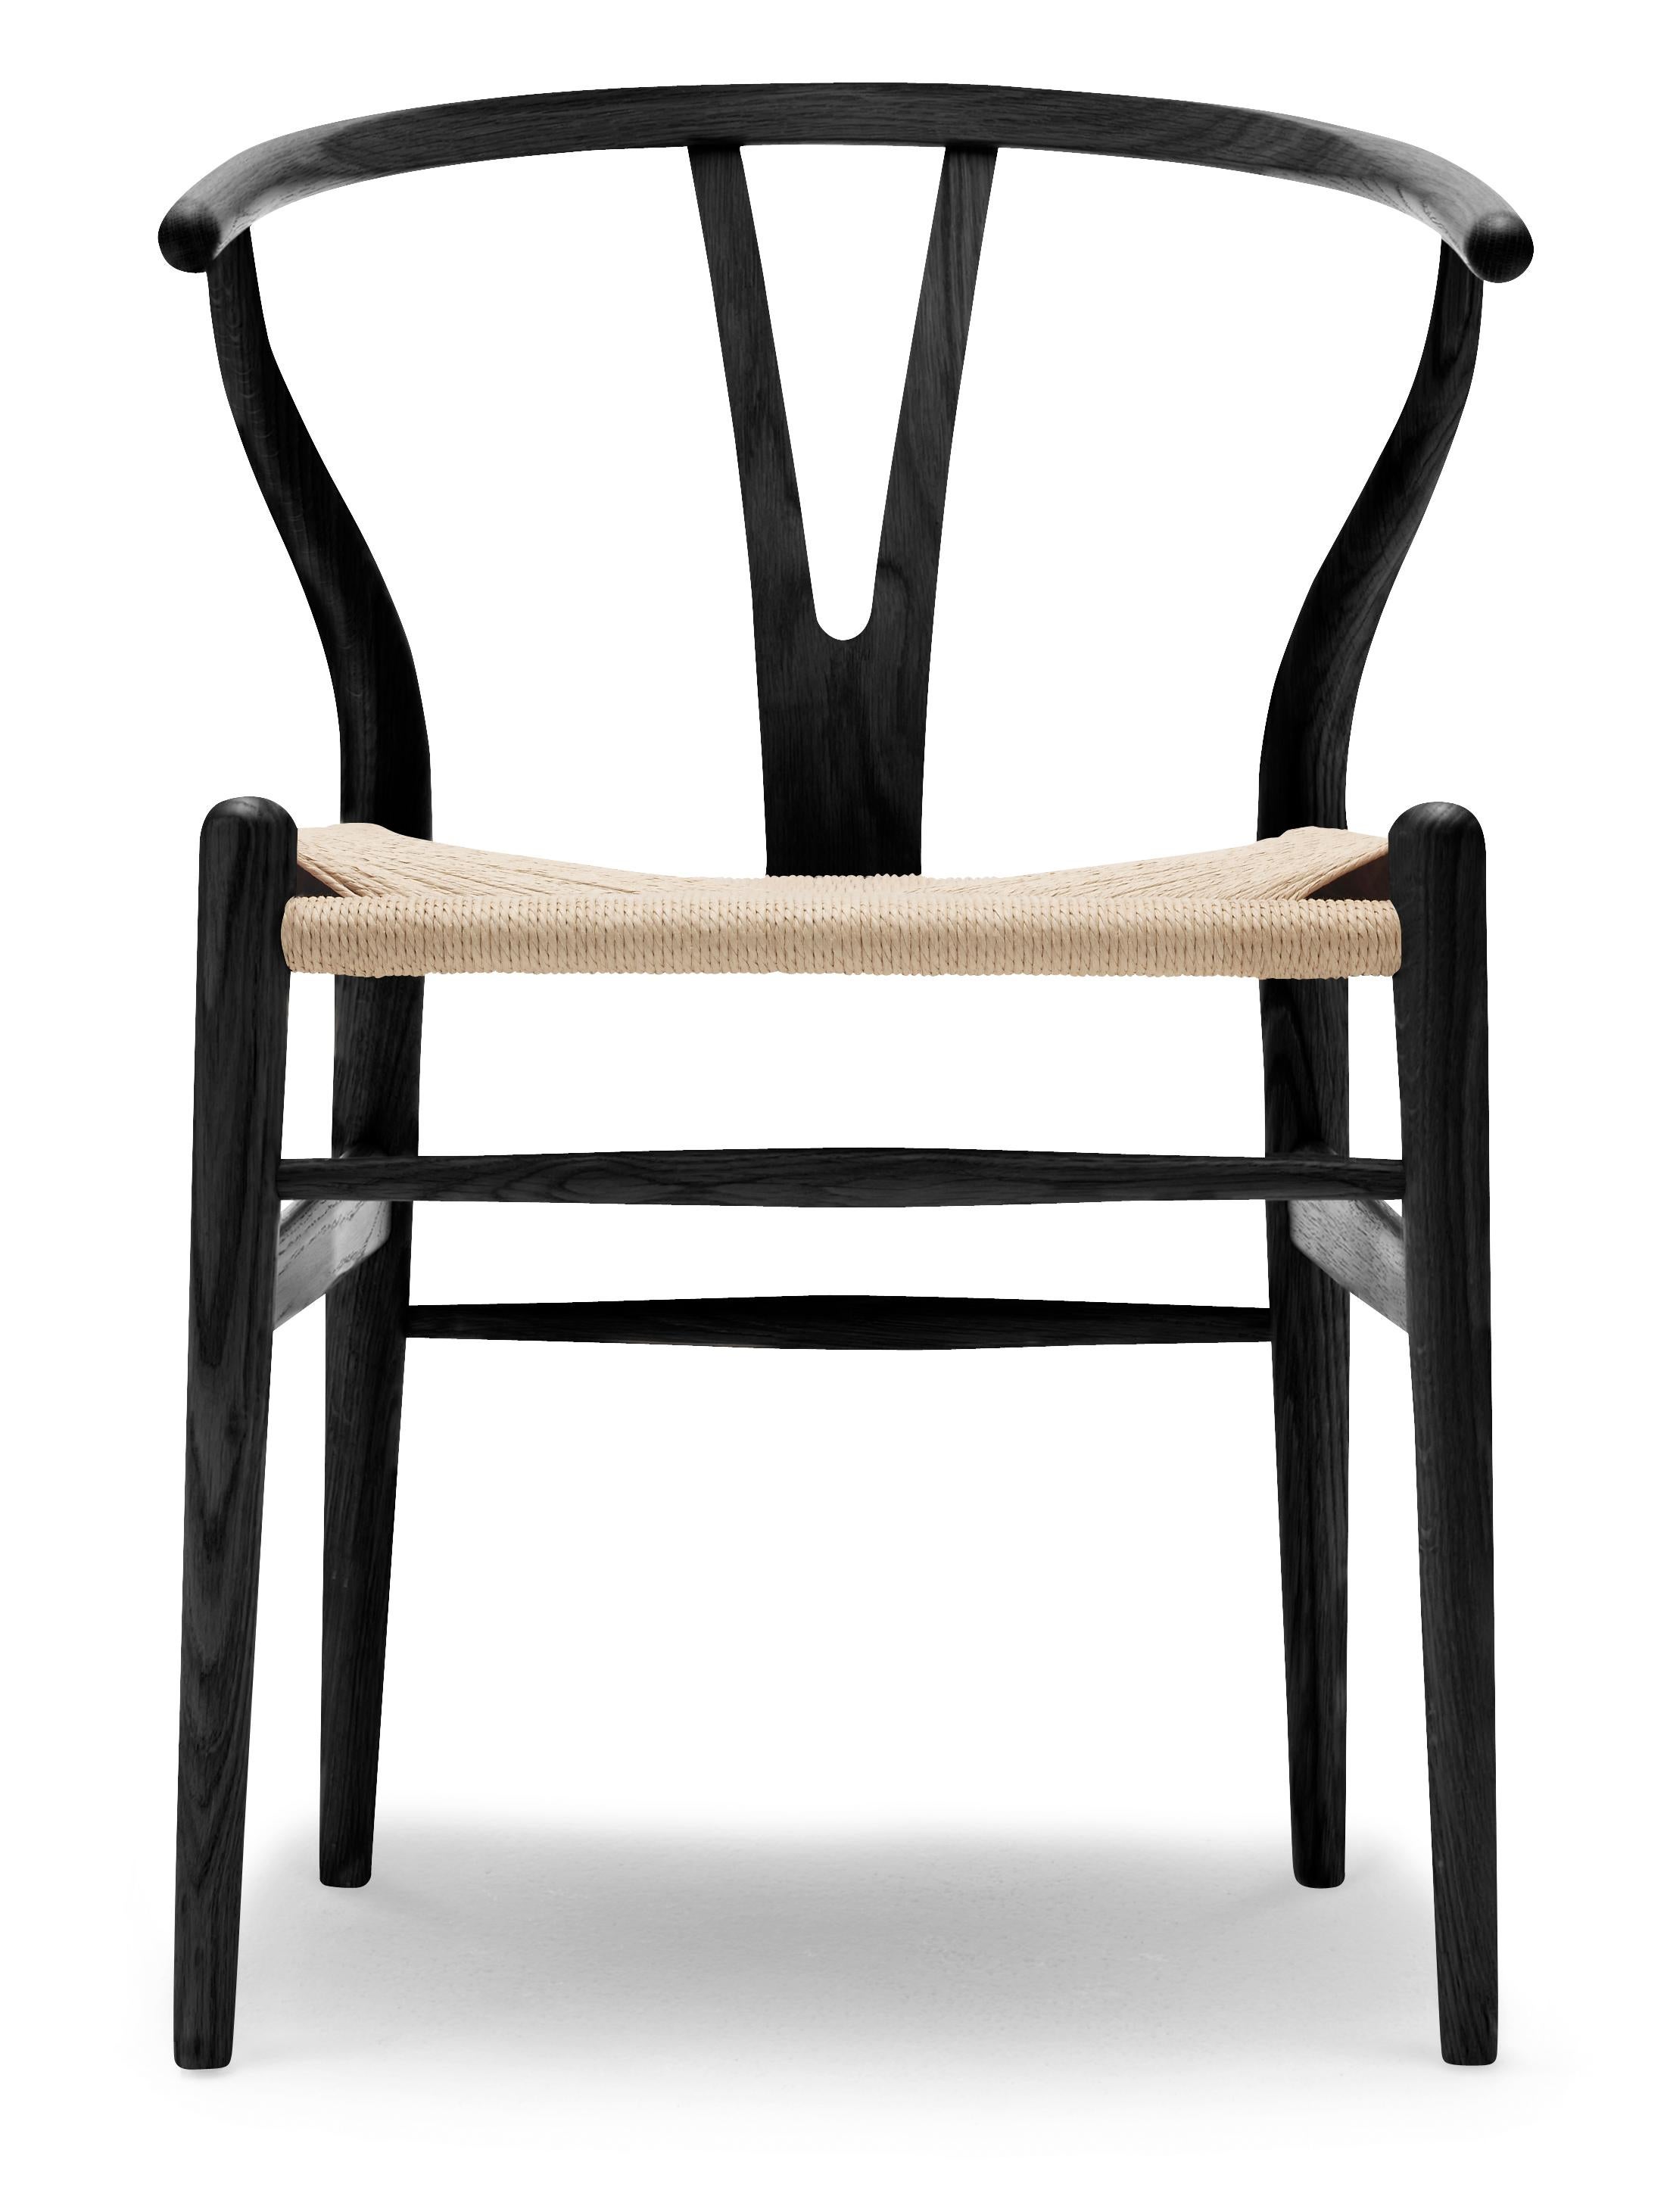 Black (Oak Painted blacks9000-N) CH24 Wishbone Chair in Wood Finishes with Natural Papercord Seat by Hans Wegner